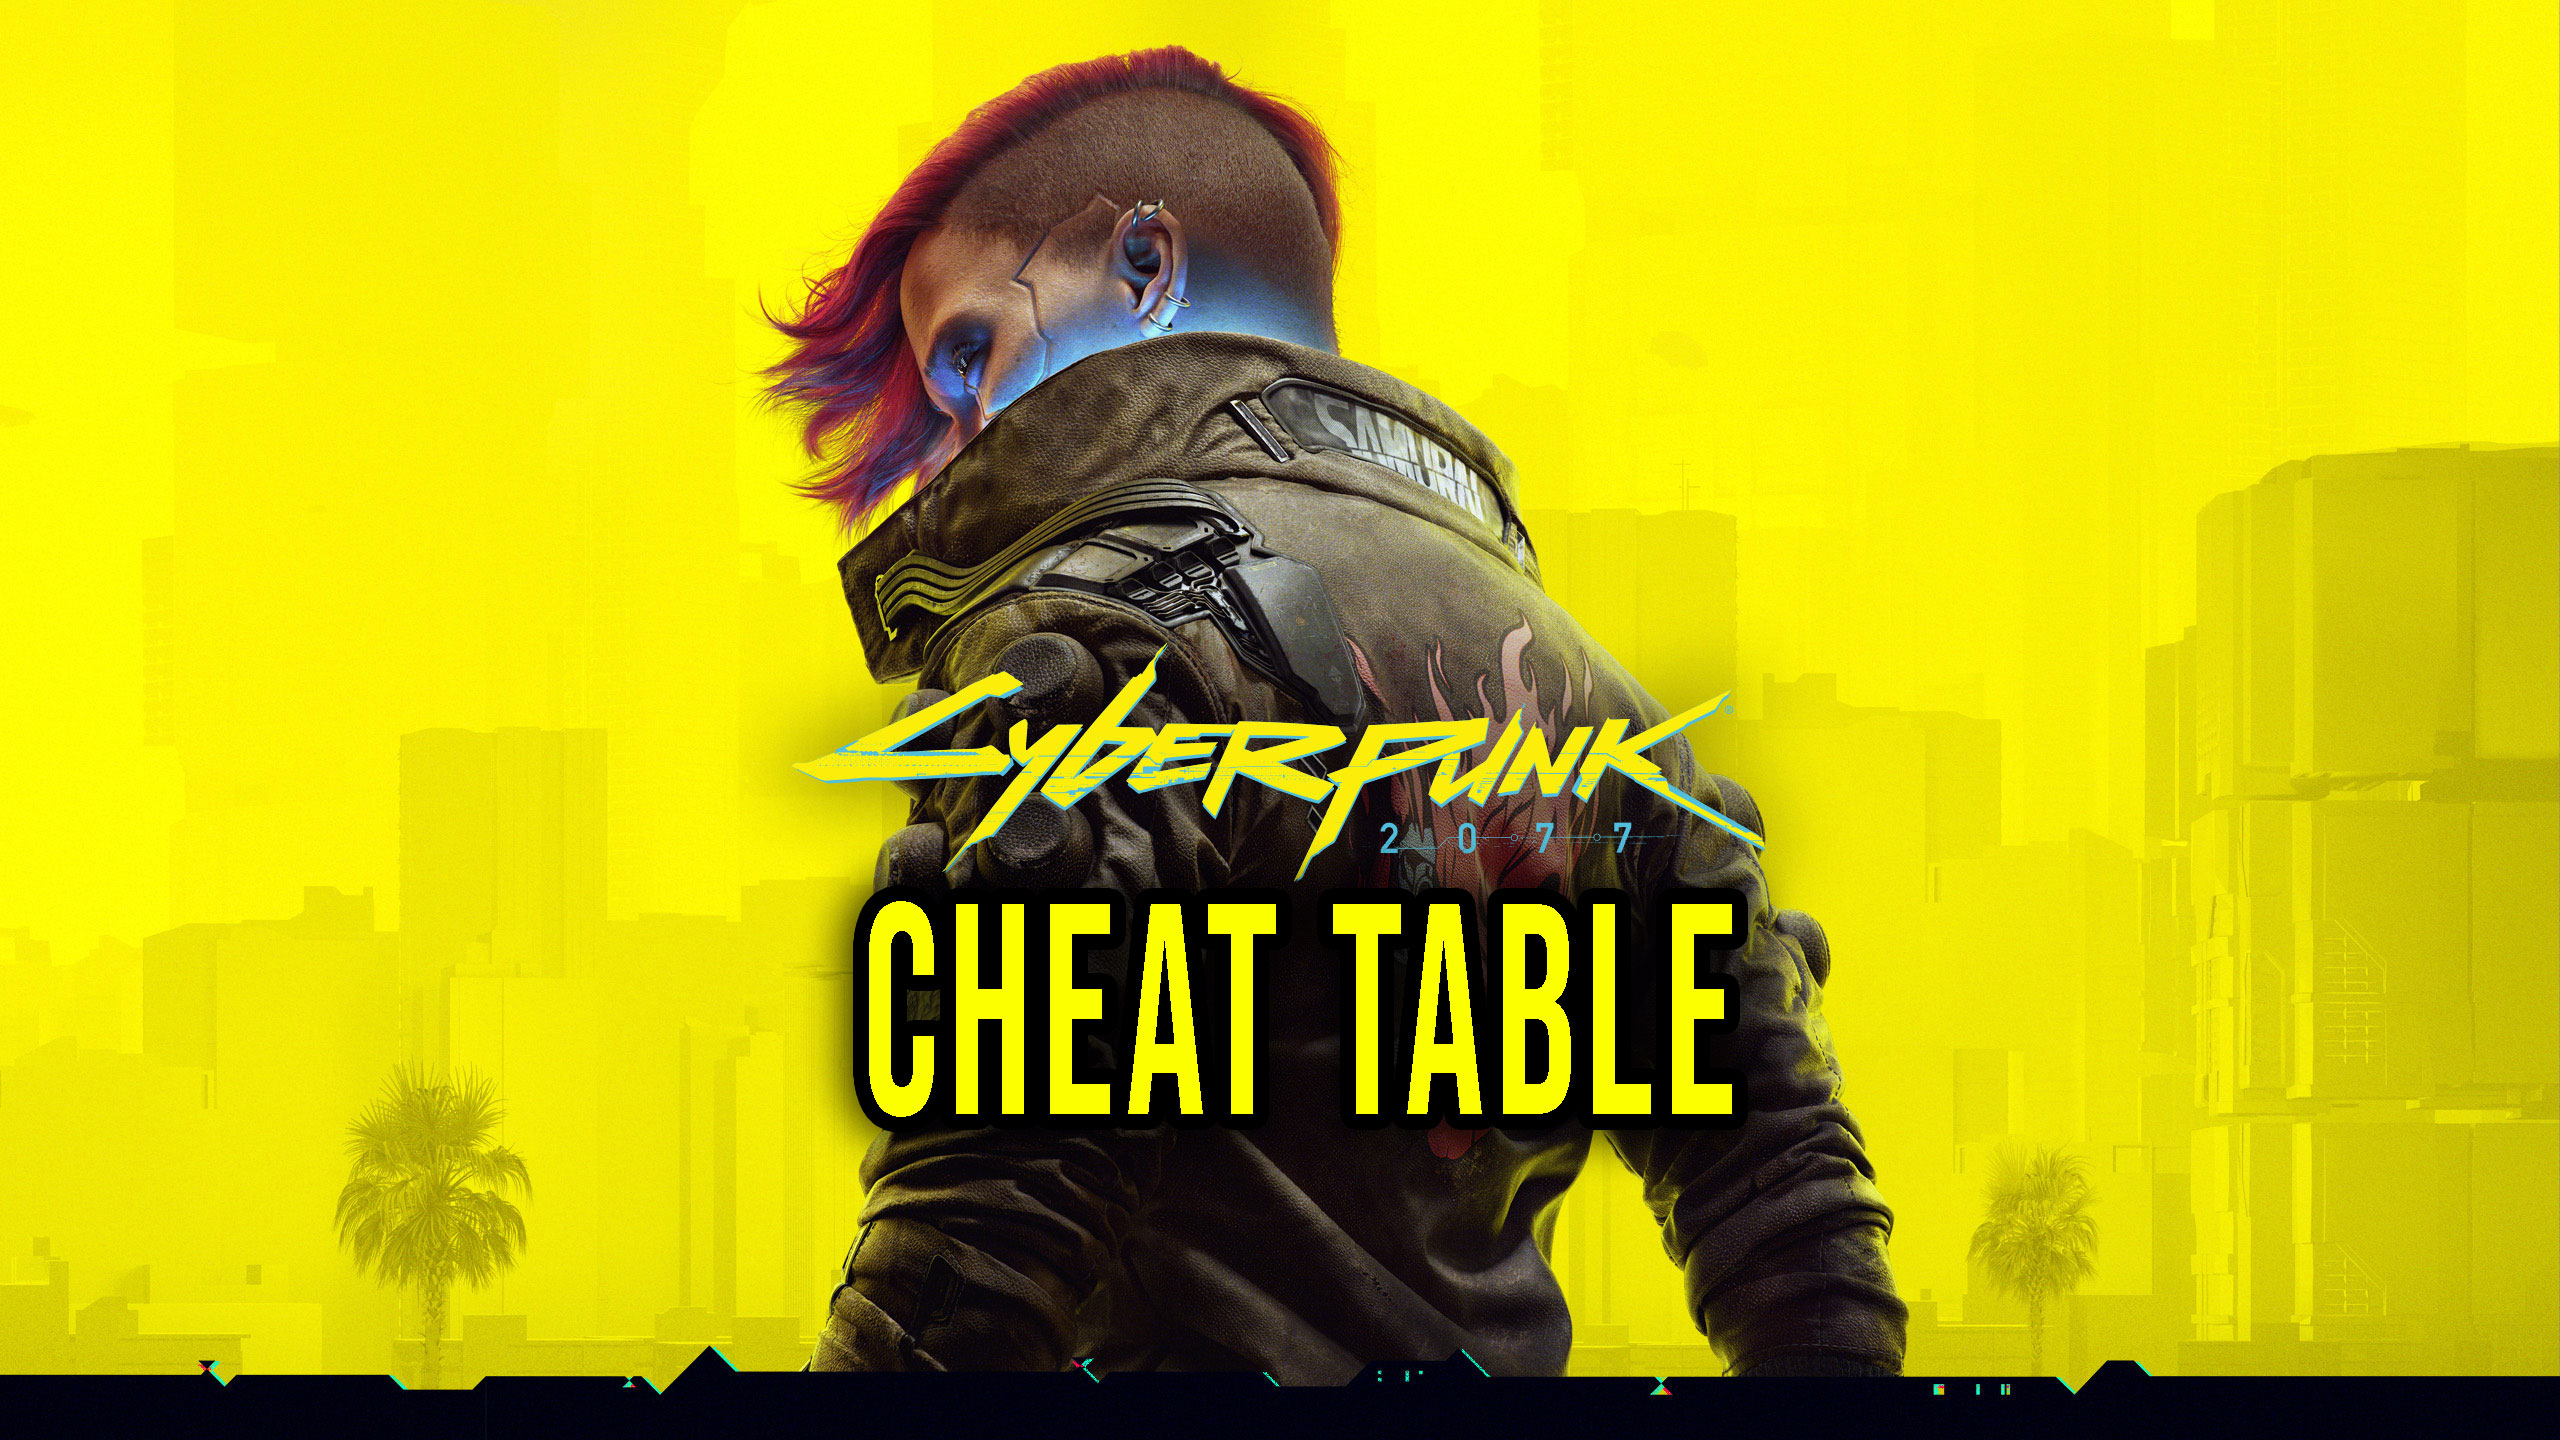 Cyberpunk 2077 Cheat Table for Cheat Engine Games Manuals